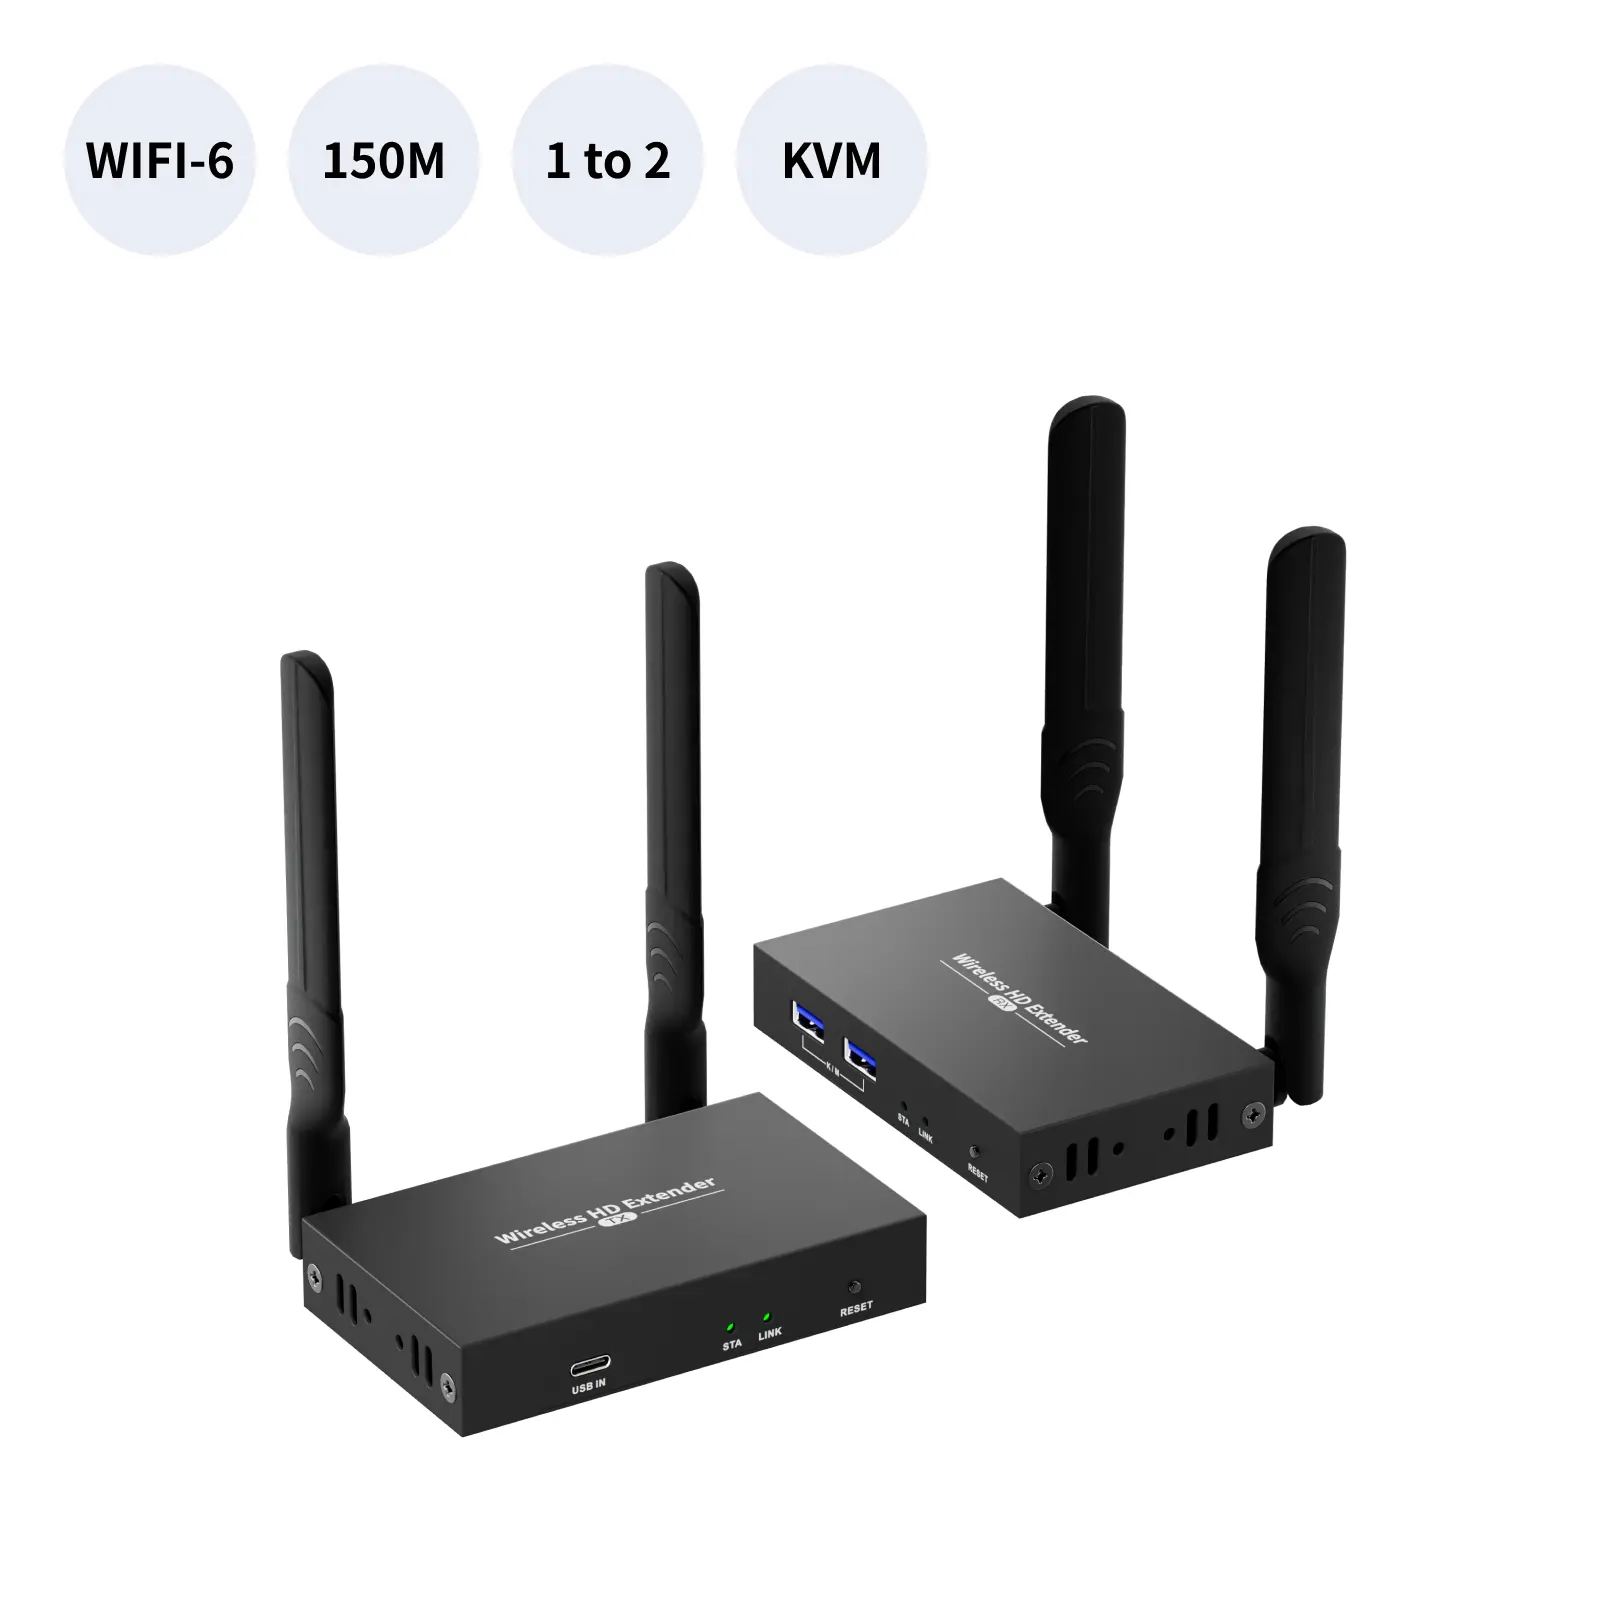 200M 1920*1080P 60Hz loop-out HDMI Wireless Extender updated HD USB Kvm Wireless transmitter receiver HDMI